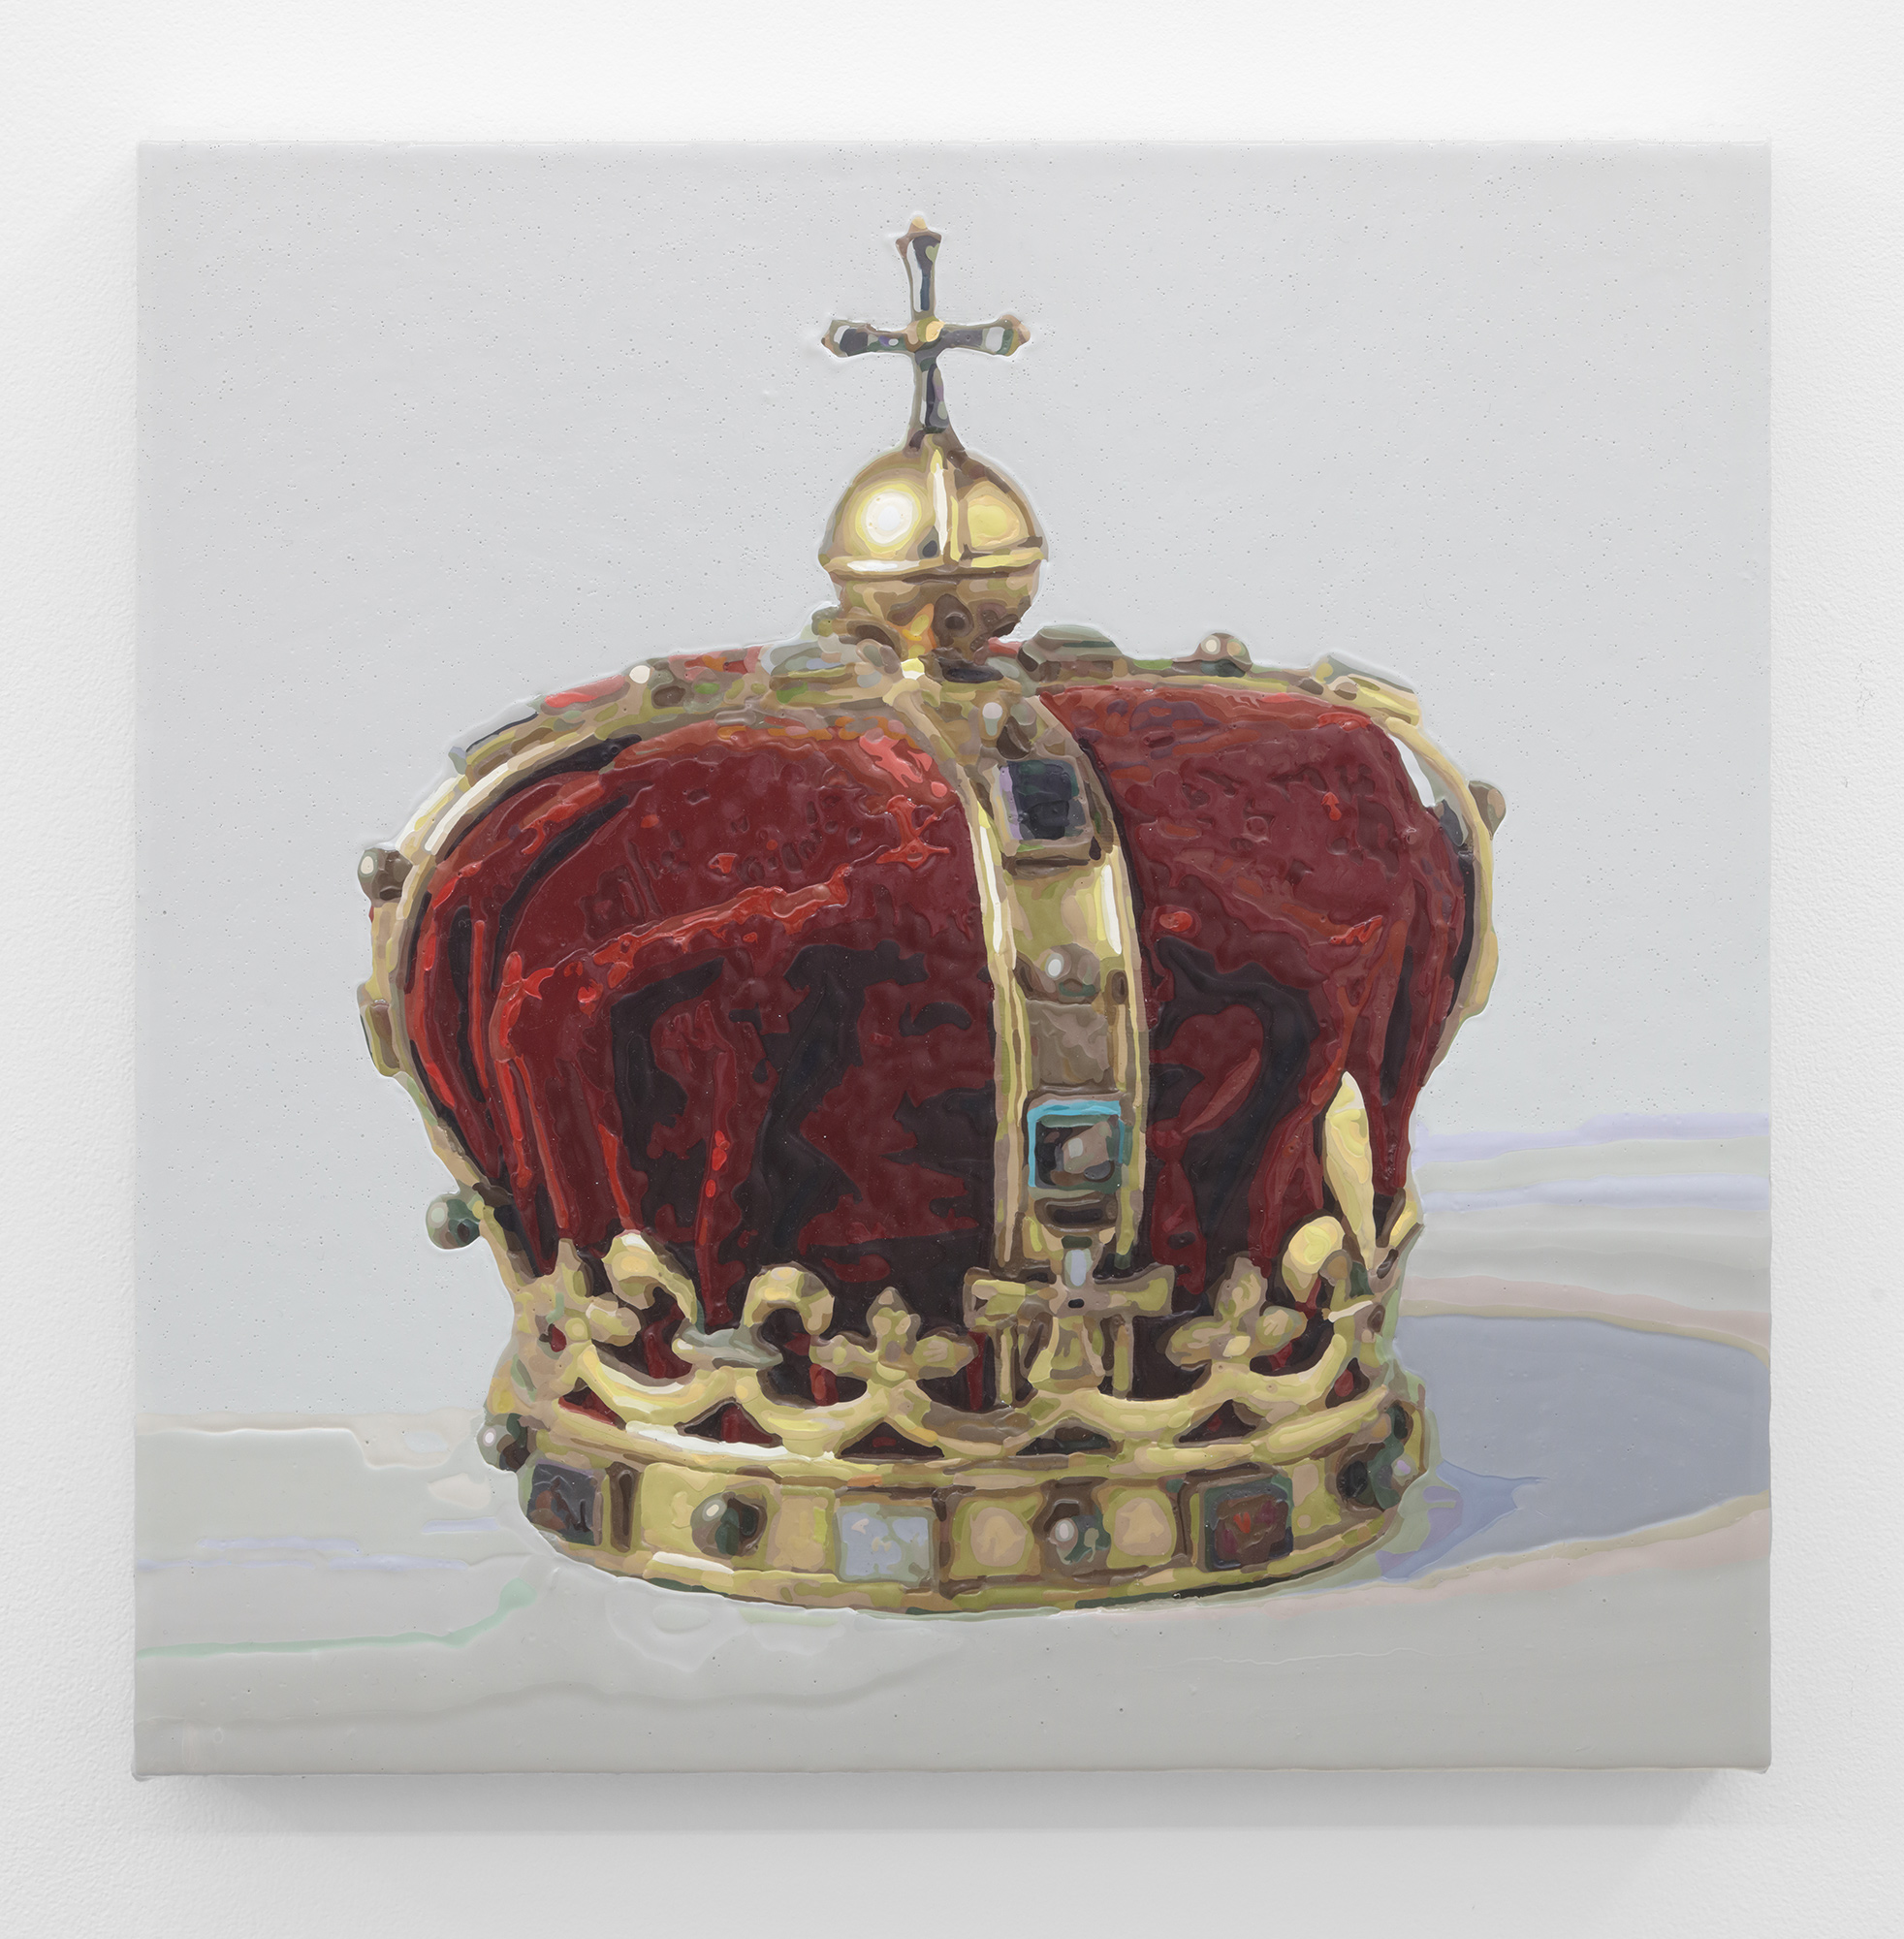  Dorian FitzGerald,  Crown For The King Of Adra, circa 1664 . 2019, acrylic on canvas mounted to board, 16 x 16 inches 